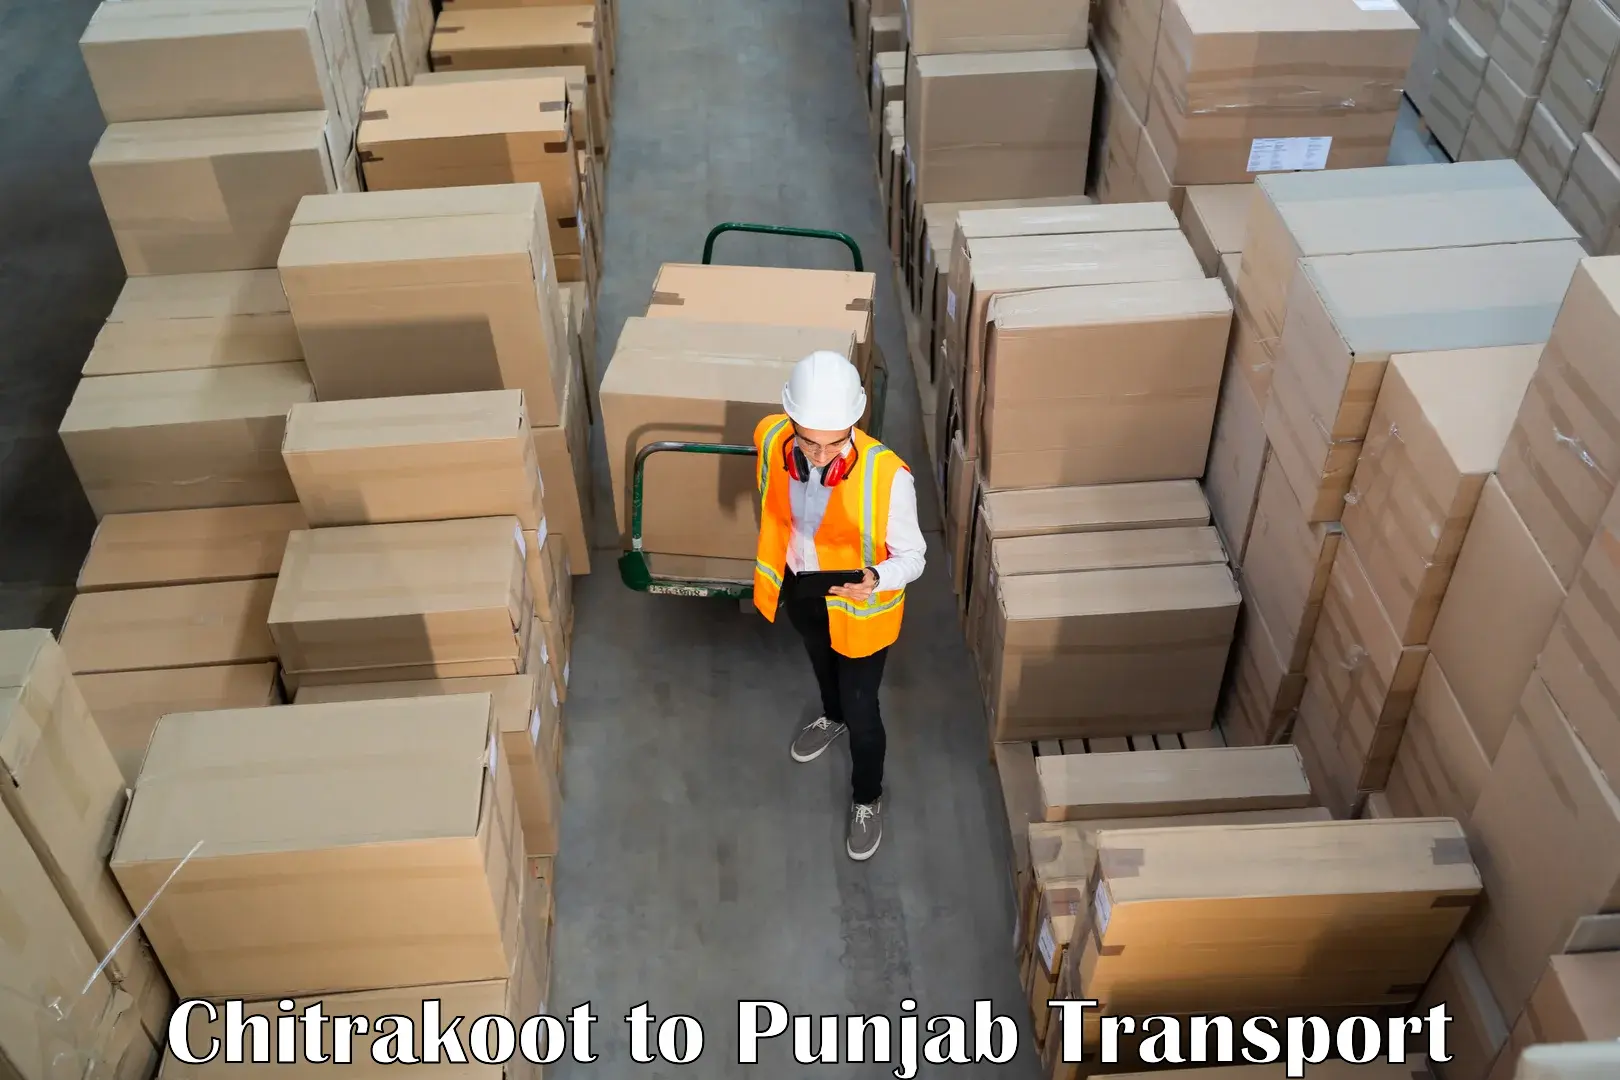 Furniture transport service Chitrakoot to Begowal